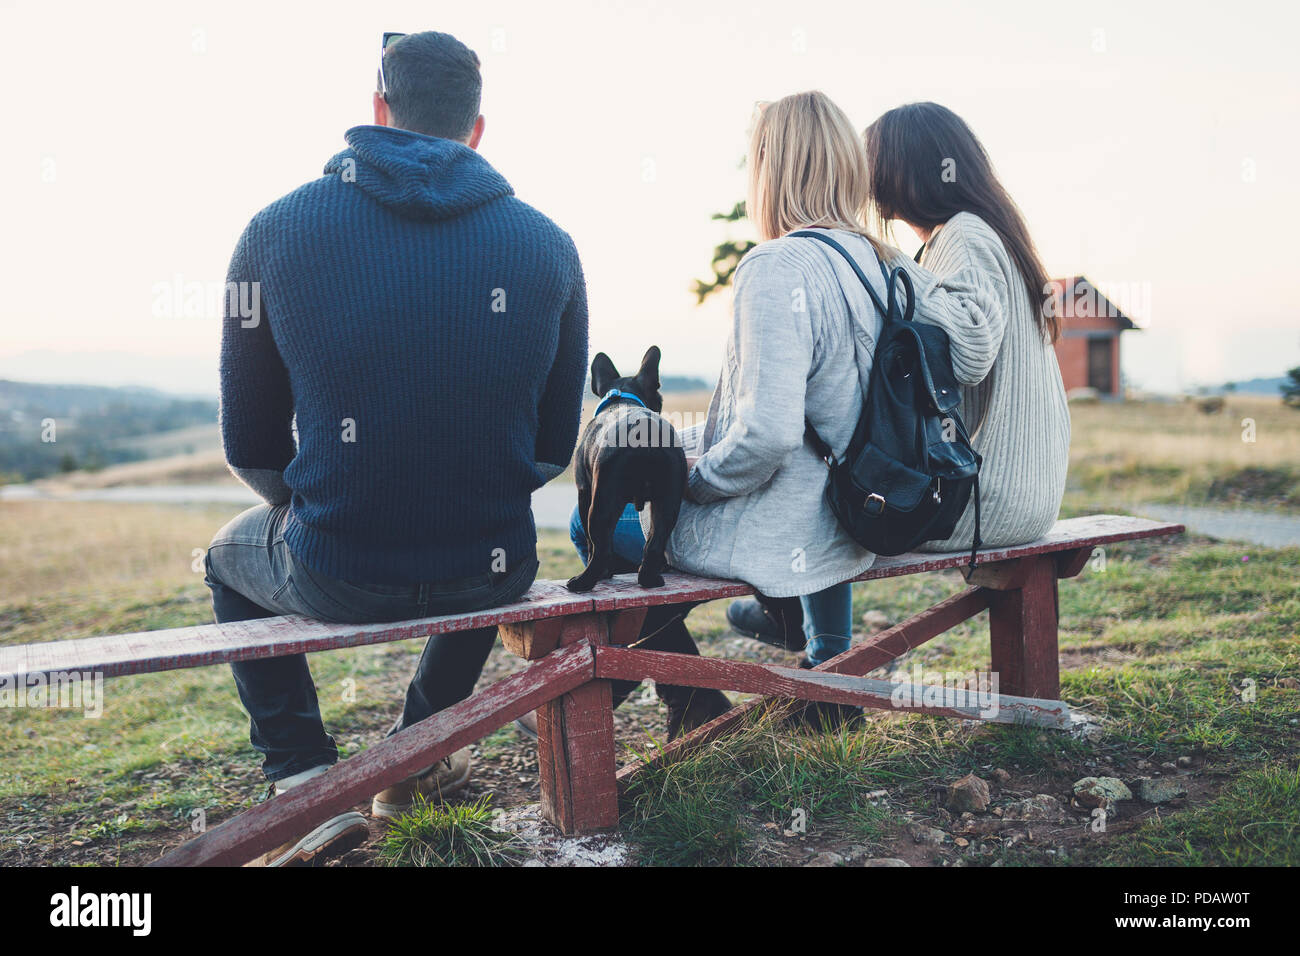 Small group of young people together with black French bulldog puppy siting on wooden bench and looking at sunset. Rear view. Stock Photo